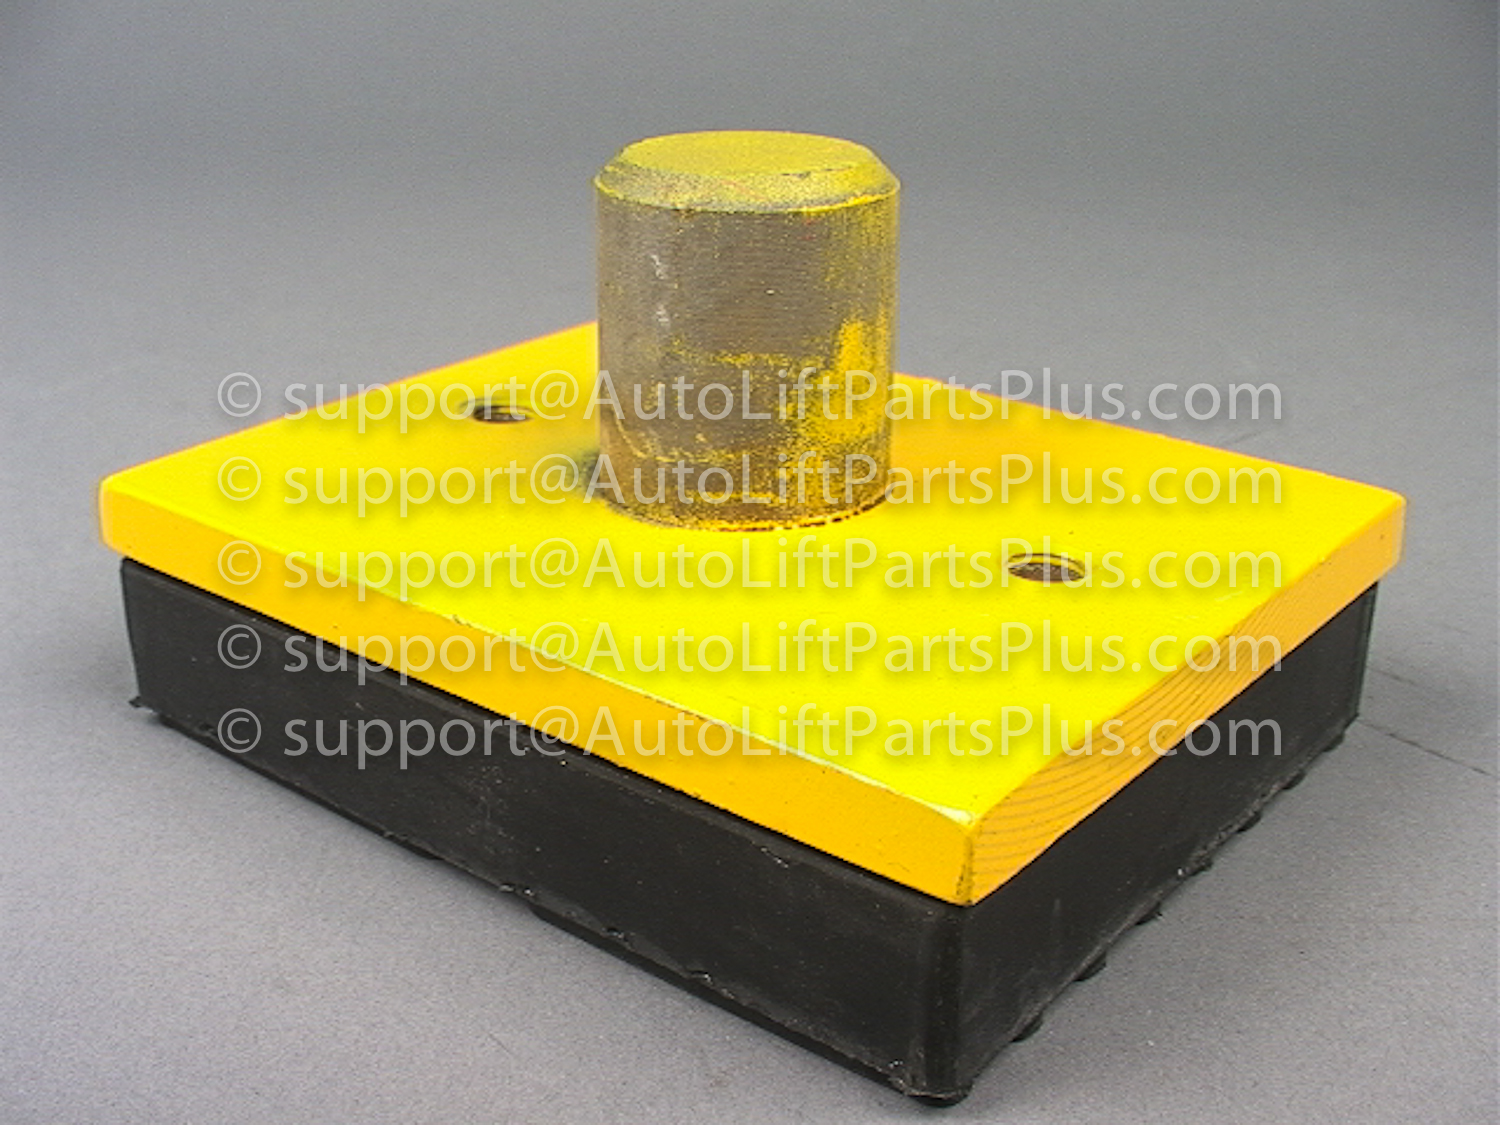 Adapter for Ammco Lift Ben Pearson Lift 1-1/2" Diameter Drop-in Pin 82591 